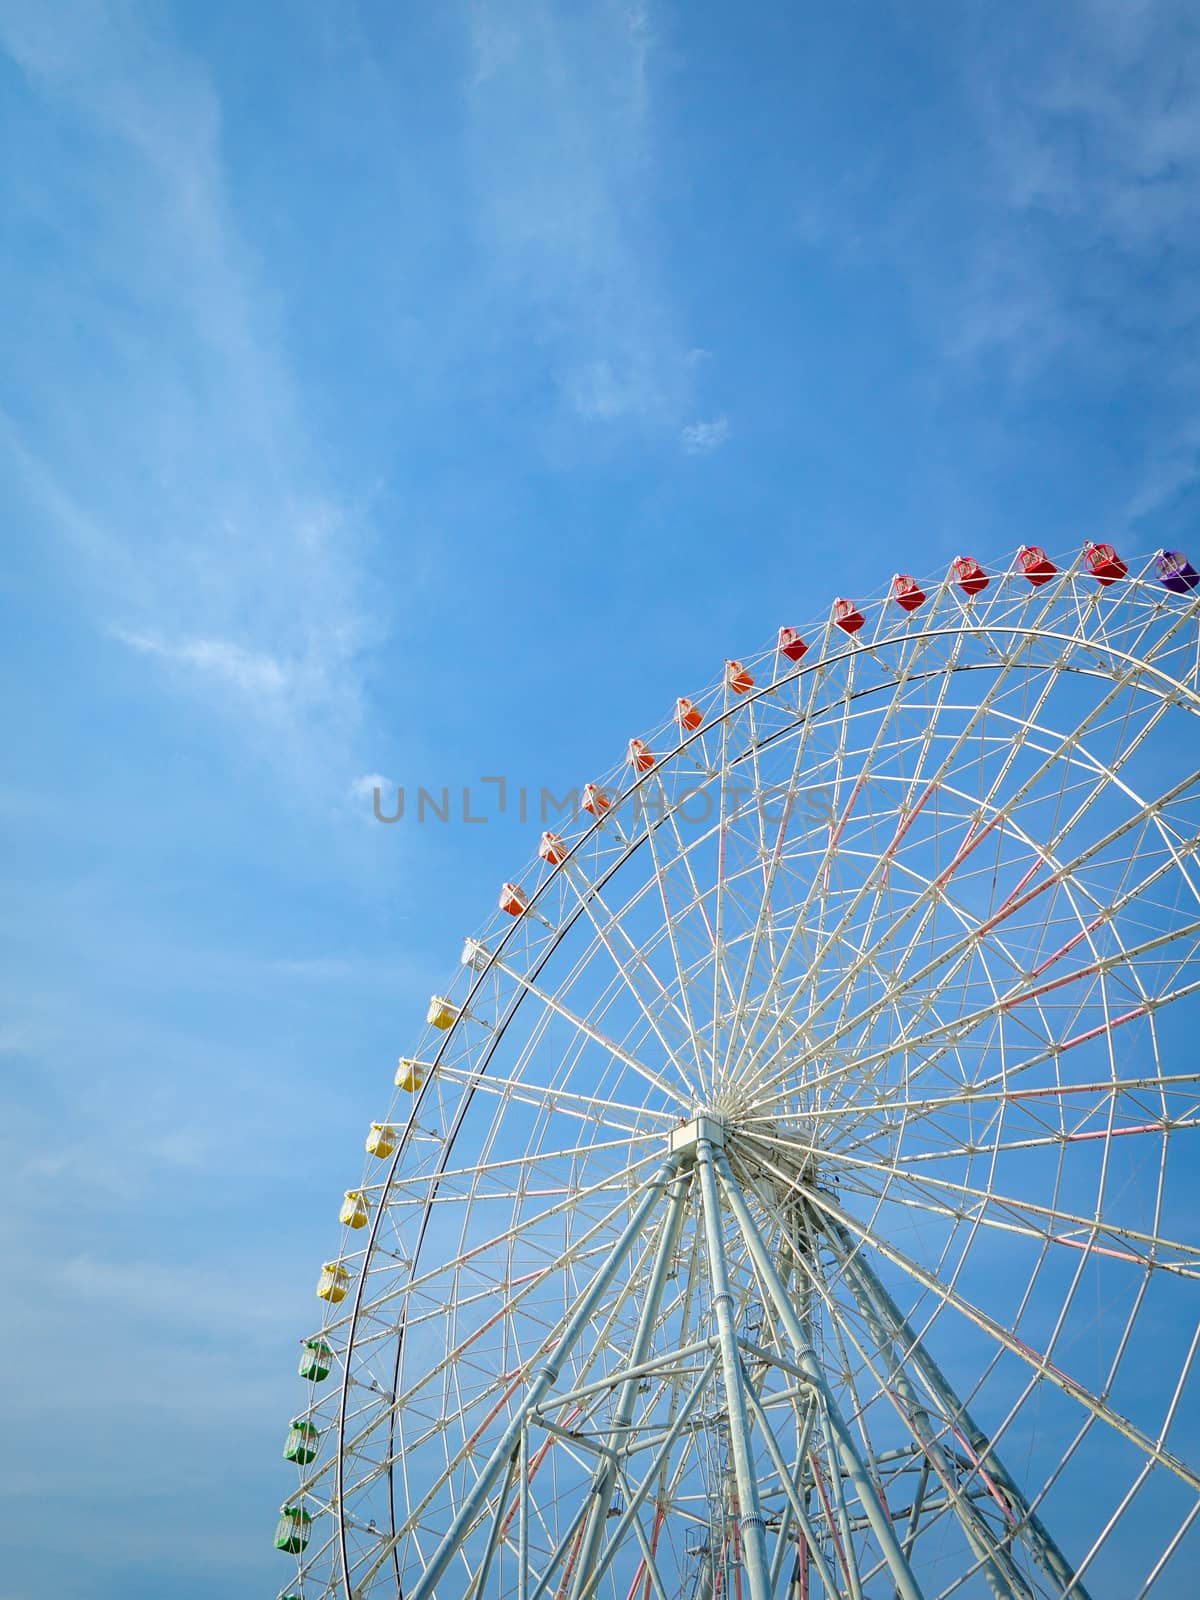 The Ferris Wheel Over Blue Sky. Nature Background by chadchai_k